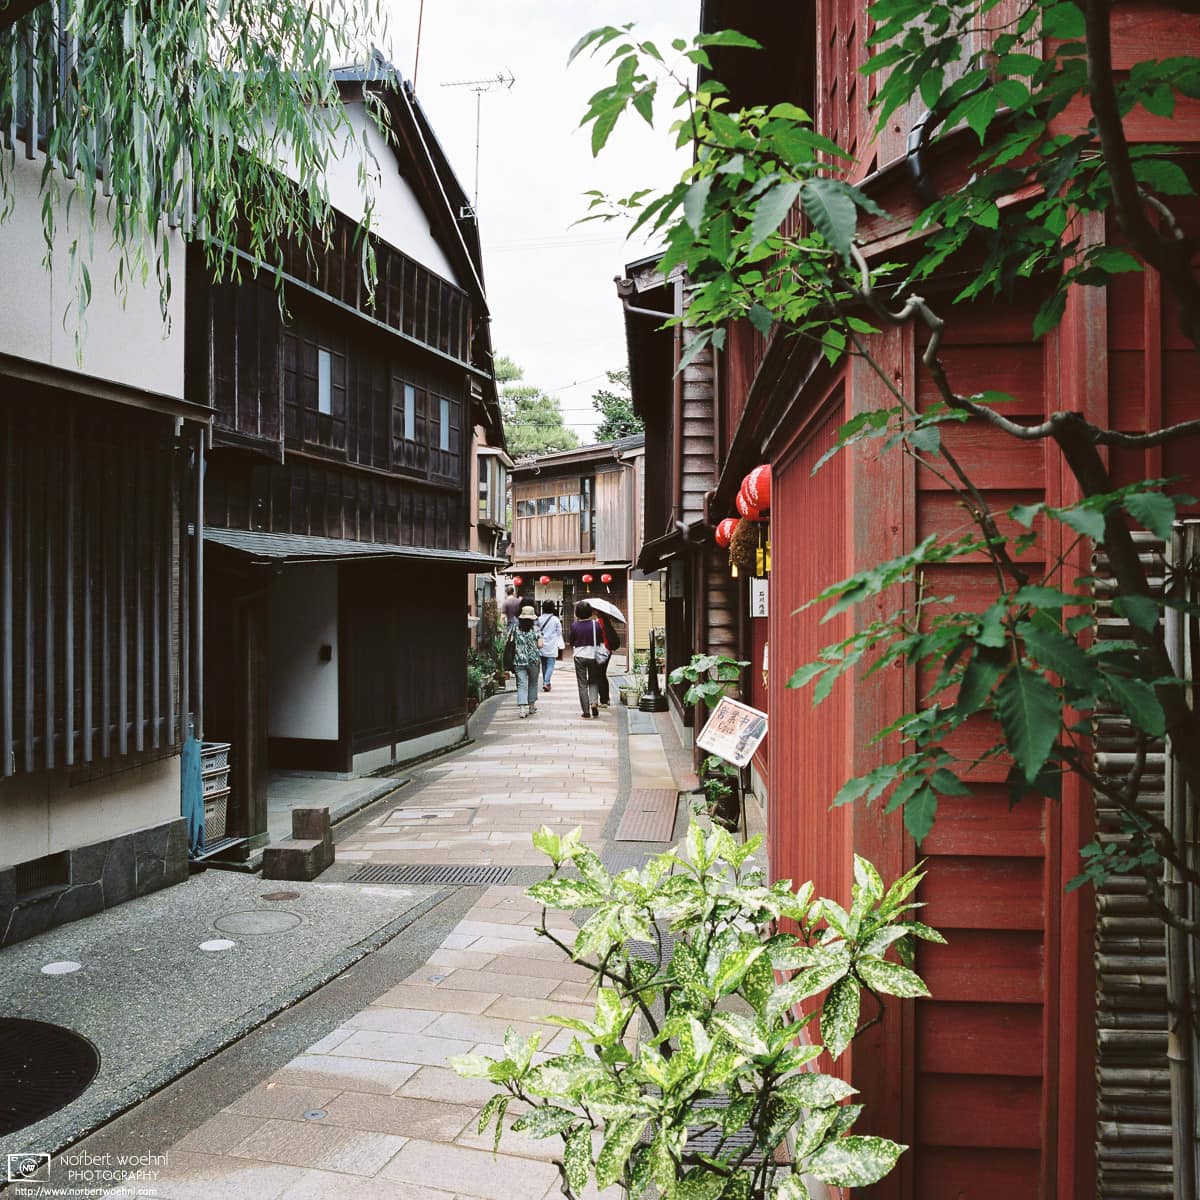 View along a pleasant side street in the historic Higashi Chayagai (ひがし茶屋街) District in Kanazawa, Japan. The area is home to many old teahouses that are now used as shops and restaurants.